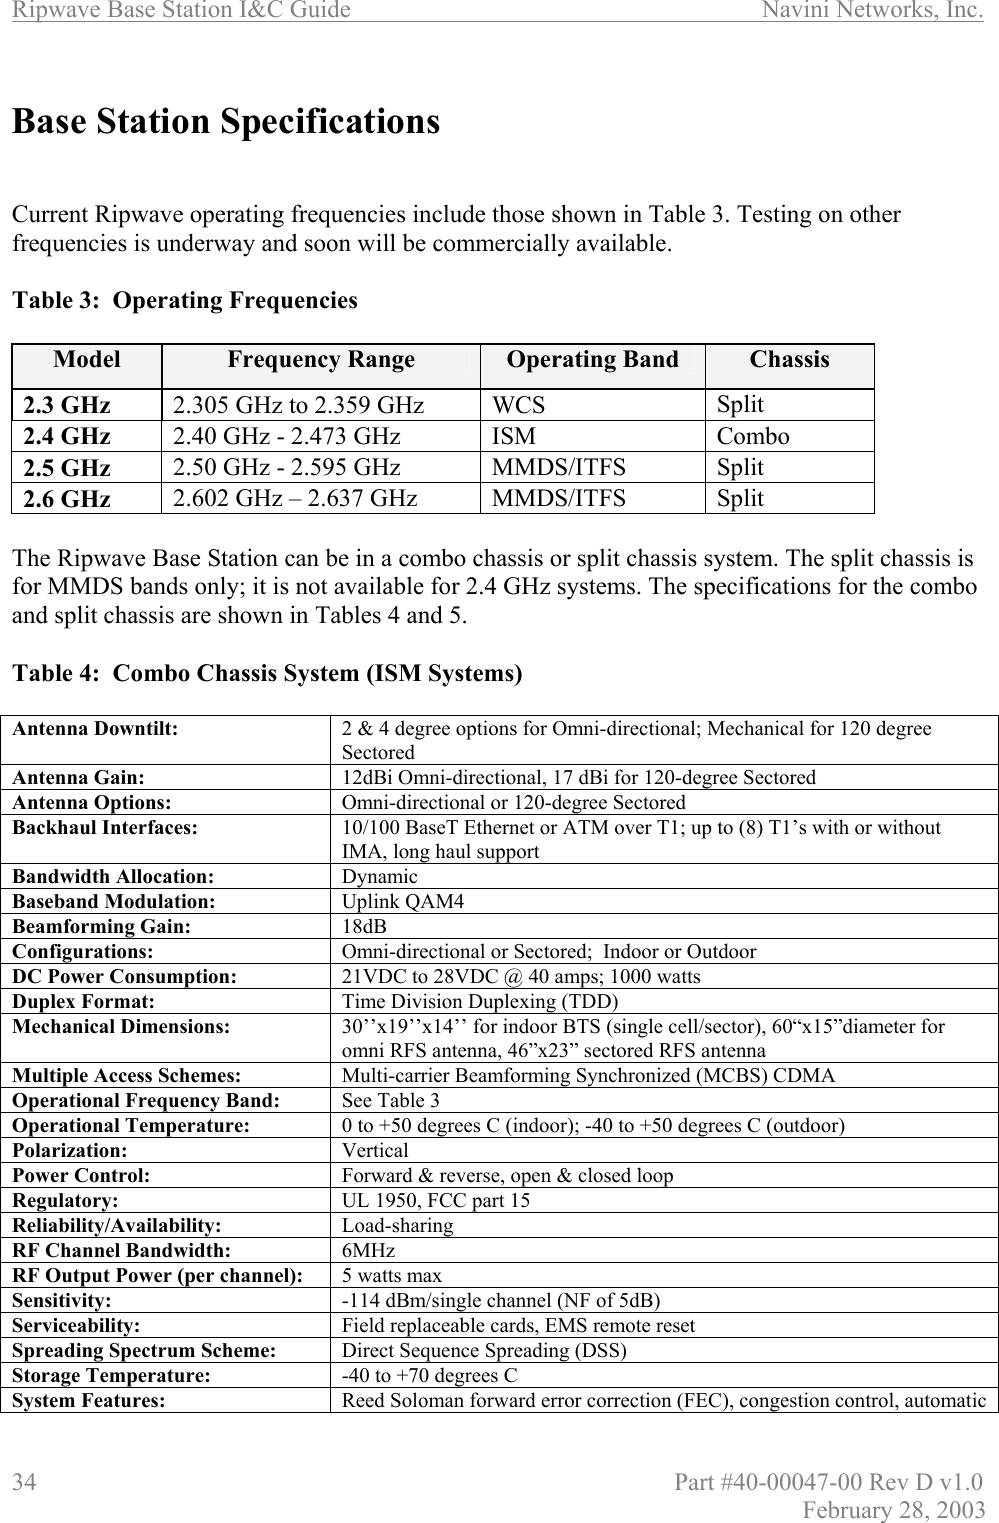 Ripwave Base Station I&amp;C Guide                      Navini Networks, Inc. 34                          Part #40-00047-00 Rev D v1.0 February 28, 2003  Base Station Specifications    Current Ripwave operating frequencies include those shown in Table 3. Testing on other frequencies is underway and soon will be commercially available.  Table 3:  Operating Frequencies  Model  Frequency Range  Operating Band  Chassis 2.3 GHz  2.305 GHz to 2.359 GHz  WCS  Split 2.4 GHz   2.40 GHz - 2.473 GHz  ISM  Combo 2.5 GHz  2.50 GHz - 2.595 GHz  MMDS/ITFS  Split 2.6 GHz   2.602 GHz – 2.637 GHz  MMDS/ITFS   Split  The Ripwave Base Station can be in a combo chassis or split chassis system. The split chassis is for MMDS bands only; it is not available for 2.4 GHz systems. The specifications for the combo and split chassis are shown in Tables 4 and 5.  Table 4:  Combo Chassis System (ISM Systems)  Antenna Downtilt:  2 &amp; 4 degree options for Omni-directional; Mechanical for 120 degree Sectored Antenna Gain:    12dBi Omni-directional, 17 dBi for 120-degree Sectored Antenna Options:    Omni-directional or 120-degree Sectored  Backhaul Interfaces:  10/100 BaseT Ethernet or ATM over T1; up to (8) T1’s with or without IMA, long haul support Bandwidth Allocation:  Dynamic Baseband Modulation:  Uplink QAM4 Beamforming Gain:  18dB Configurations:  Omni-directional or Sectored;  Indoor or Outdoor DC Power Consumption:  21VDC to 28VDC @ 40 amps; 1000 watts Duplex Format:   Time Division Duplexing (TDD)  Mechanical Dimensions:  30’’x19’’x14’’ for indoor BTS (single cell/sector), 60“x15”diameter for omni RFS antenna, 46”x23” sectored RFS antenna Multiple Access Schemes:  Multi-carrier Beamforming Synchronized (MCBS) CDMA Operational Frequency Band:  See Table 3  Operational Temperature:  0 to +50 degrees C (indoor); -40 to +50 degrees C (outdoor) Polarization:  Vertical Power Control:  Forward &amp; reverse, open &amp; closed loop Regulatory:  UL 1950, FCC part 15 Reliability/Availability:  Load-sharing RF Channel Bandwidth:  6MHz RF Output Power (per channel):  5 watts max  Sensitivity:  -114 dBm/single channel (NF of 5dB) Serviceability:  Field replaceable cards, EMS remote reset Spreading Spectrum Scheme:  Direct Sequence Spreading (DSS) Storage Temperature:  -40 to +70 degrees C System Features:  Reed Soloman forward error correction (FEC), congestion control, automatic 